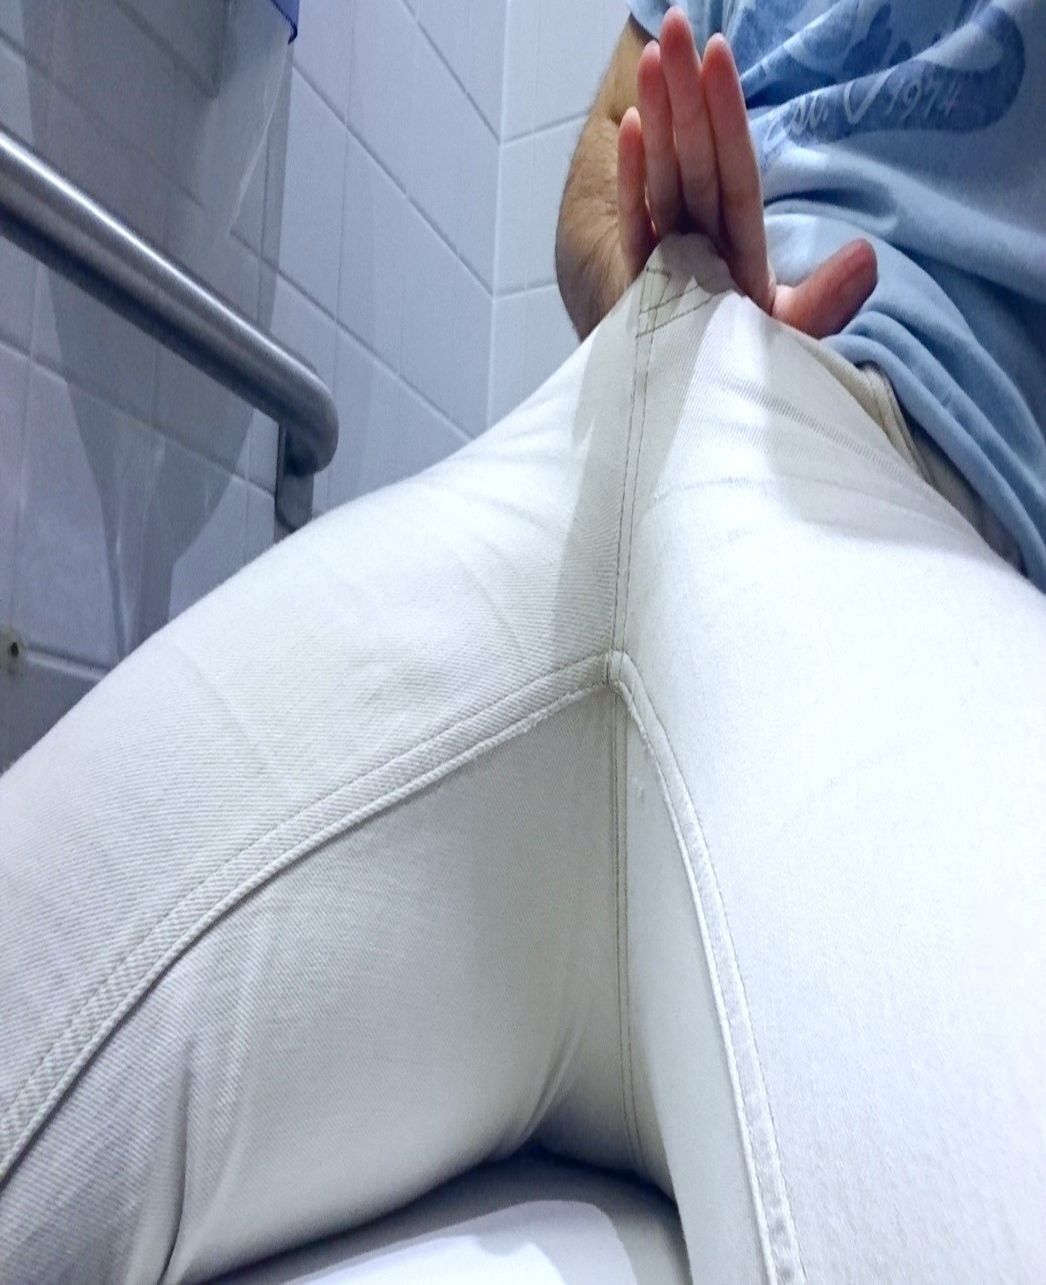 Erection in pants #5